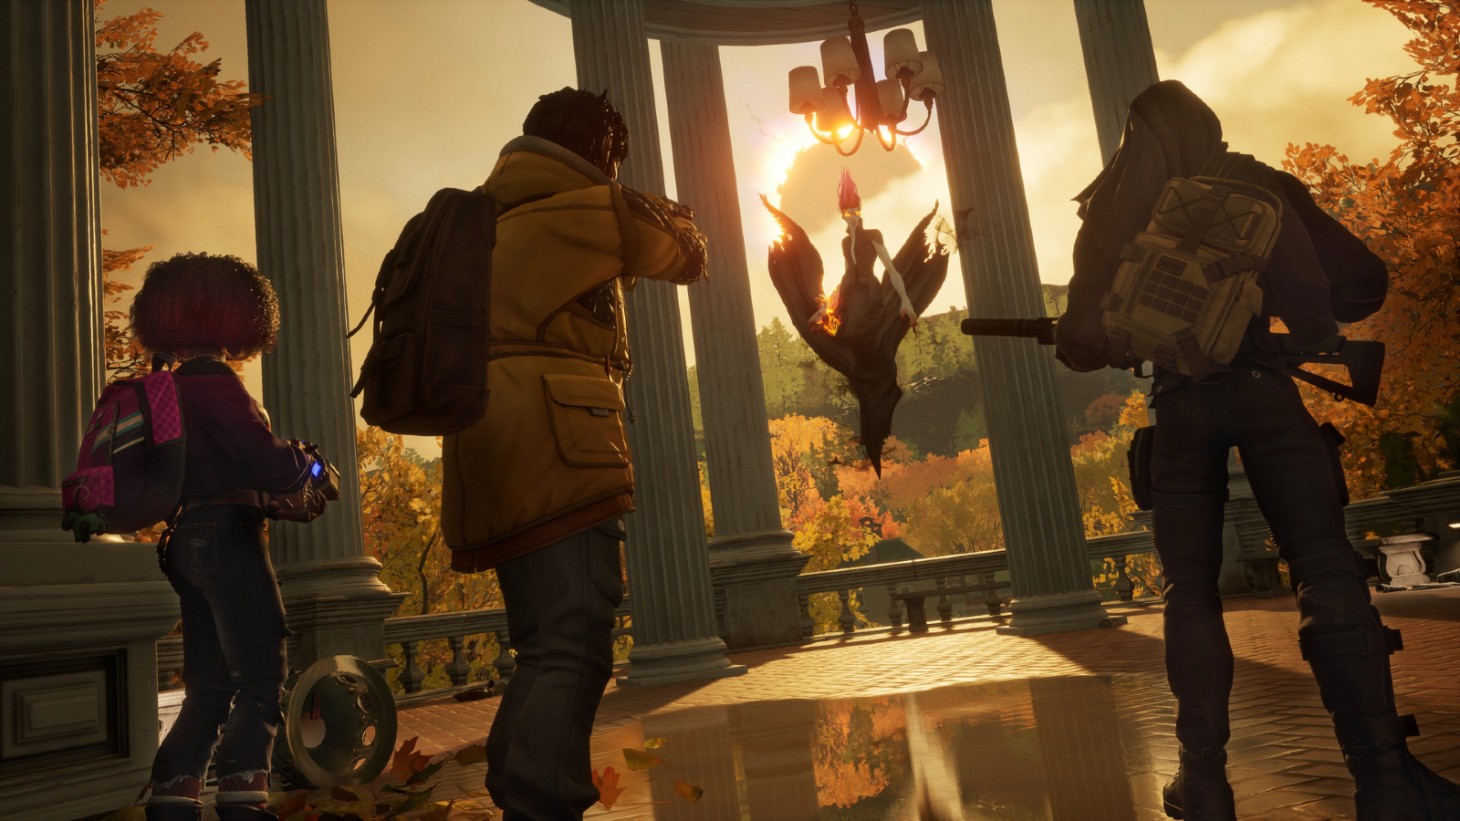 State Of Decay 2 Collector's Edition Announced, Doesn't Come With